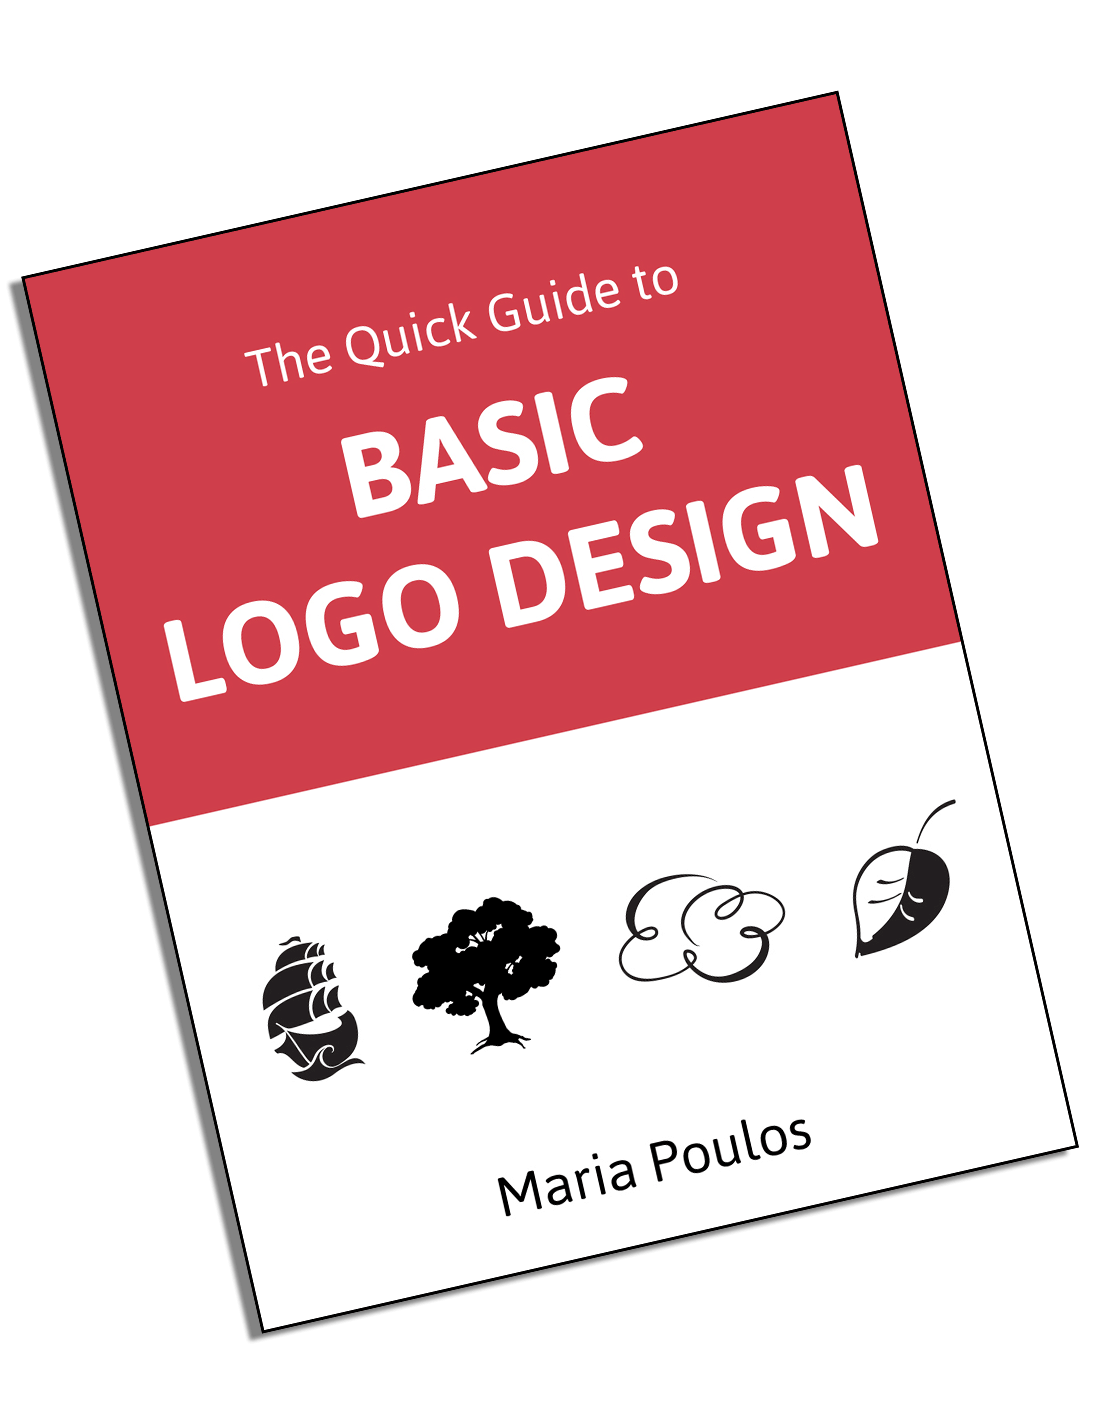 Logos: Best Use Practices